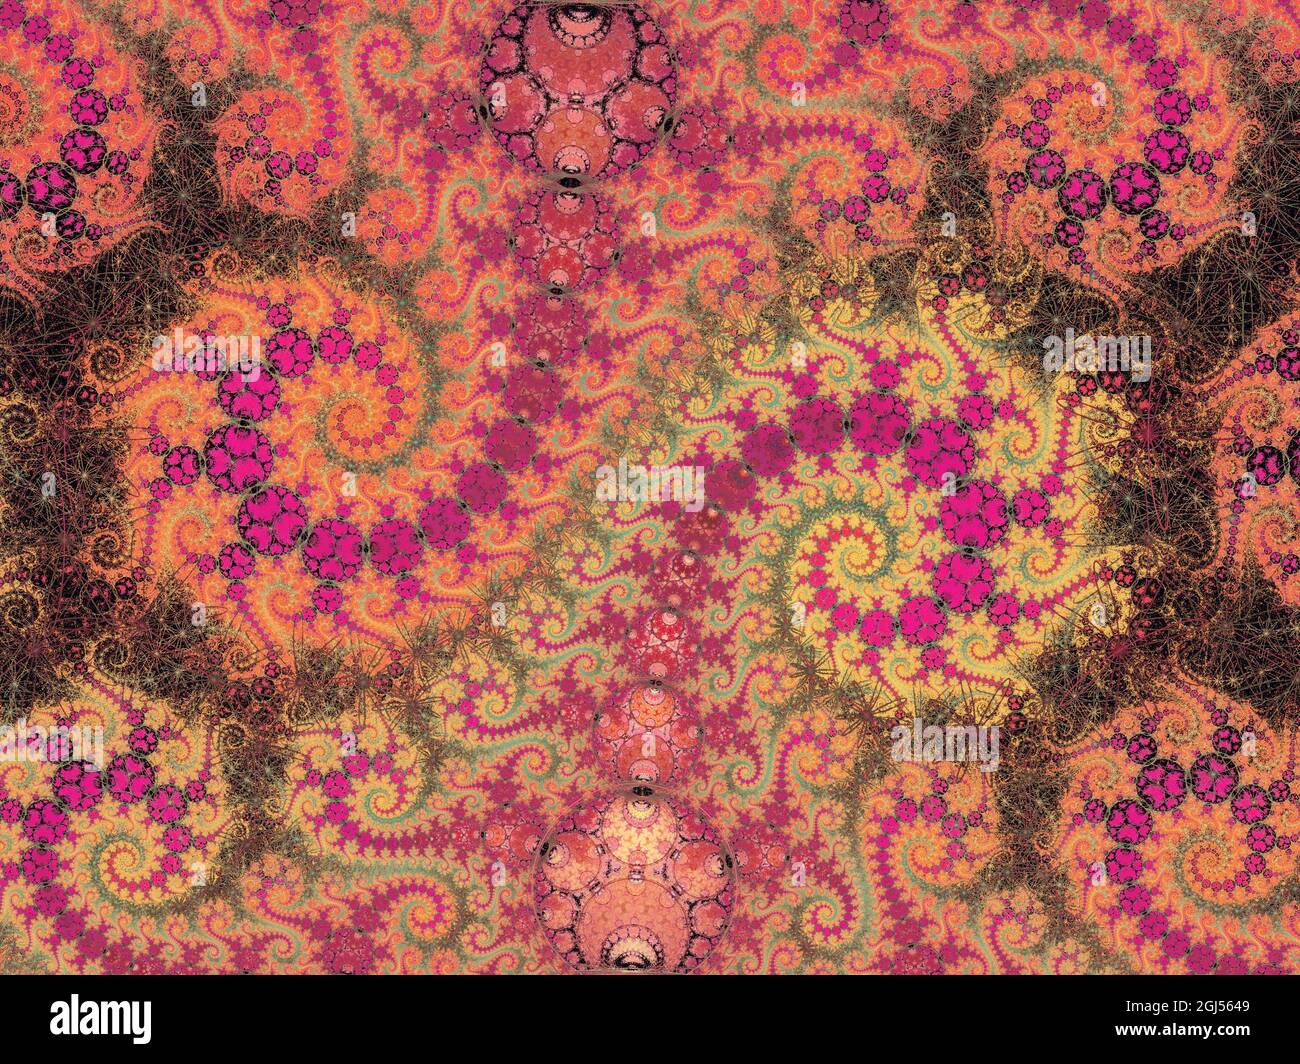 Astratto Swirly Spiral Flame Fractal Design Foto Stock